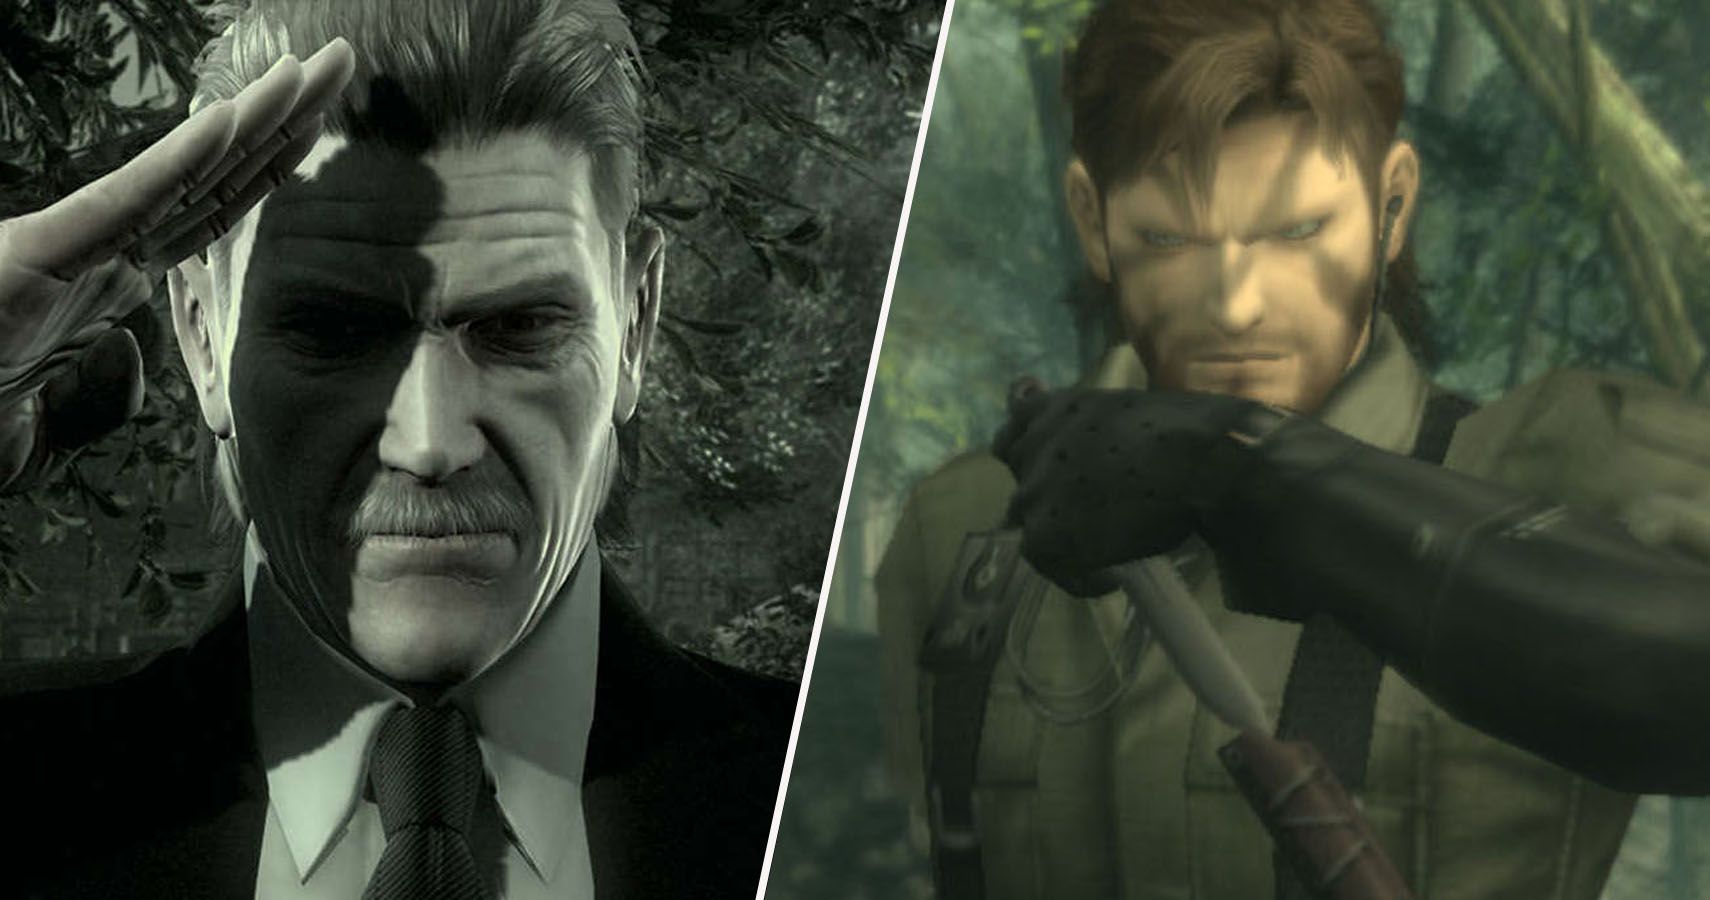 Metal Gear Solid 1: Every Main Character's Age, Height, And Birthday